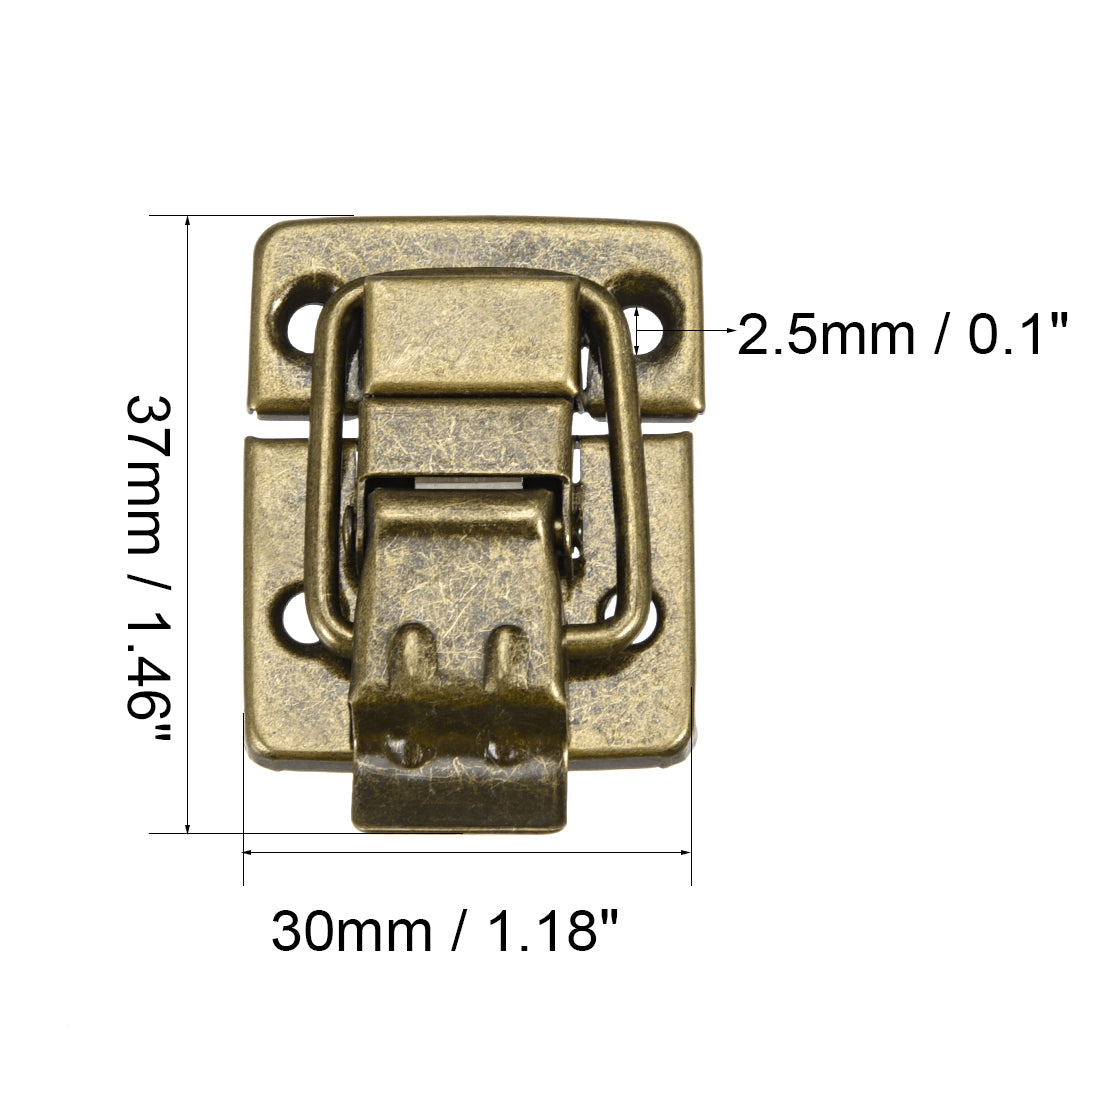 uxcell Uxcell 37mm x 30mm Metal Small Size Suitcase Hasp Catch Latch Bronze Tone with Screws 2 Pcs